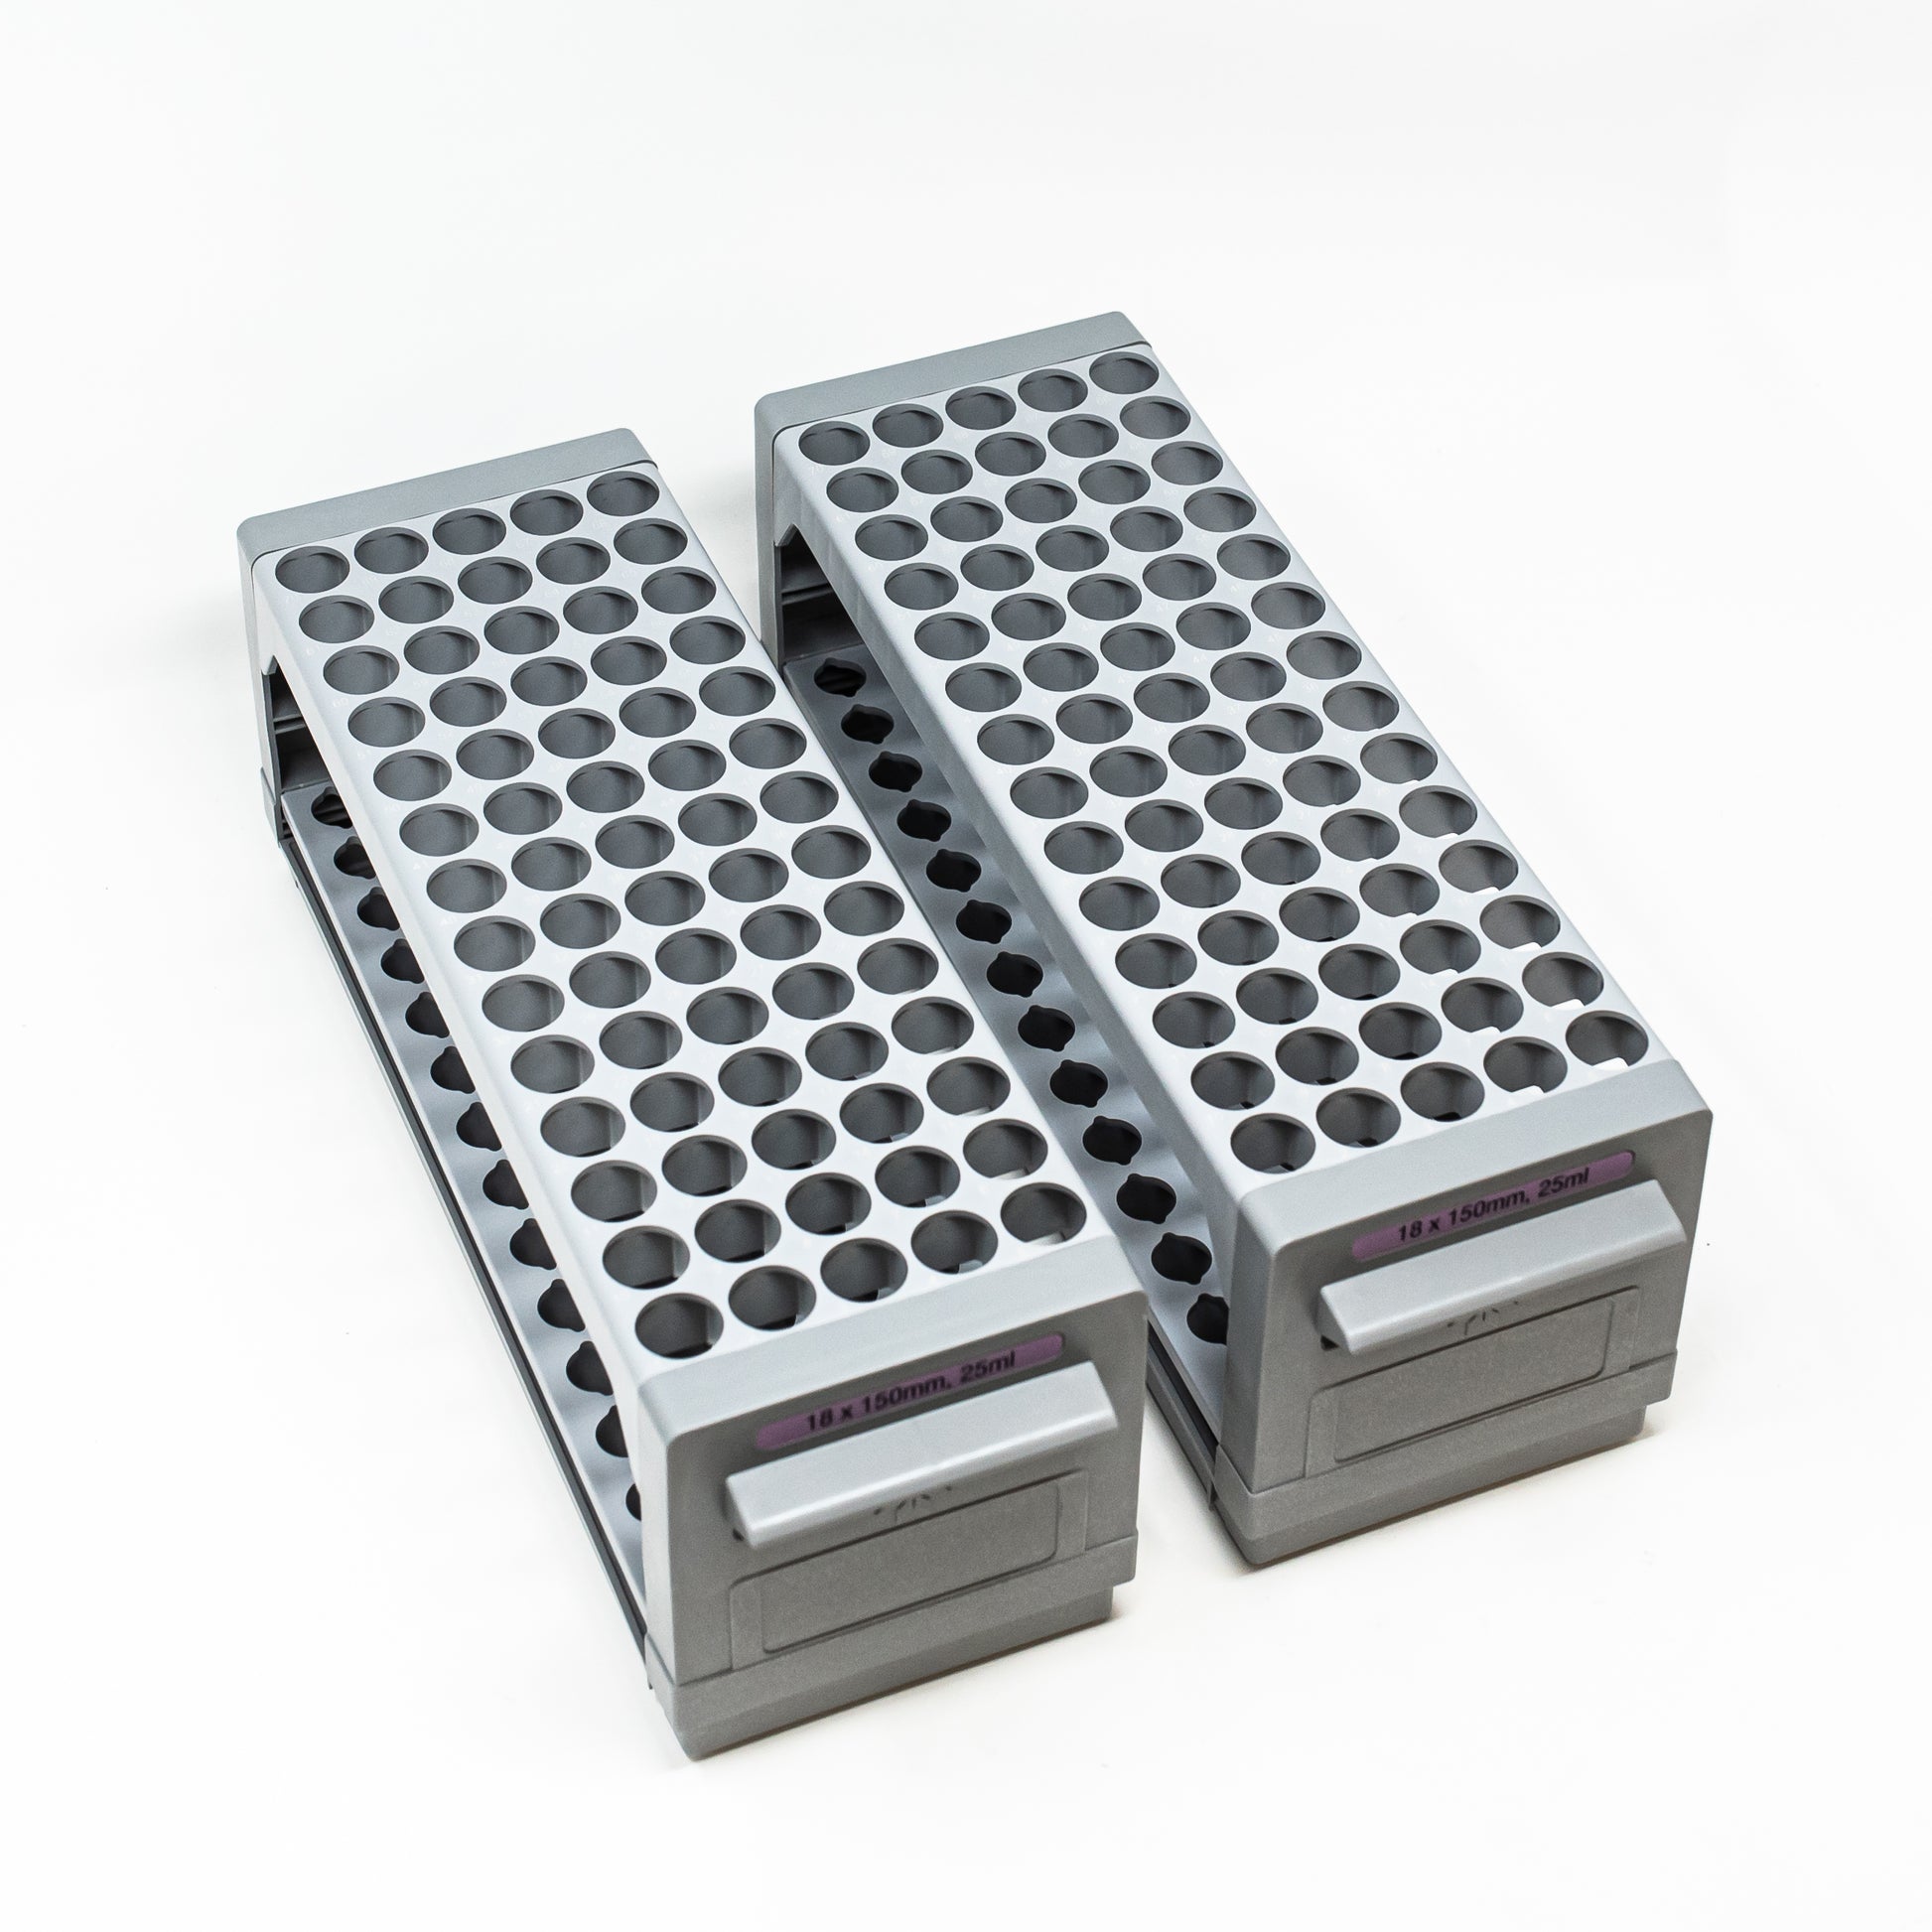 Set of 2 racks with 70 holes each for test tubes